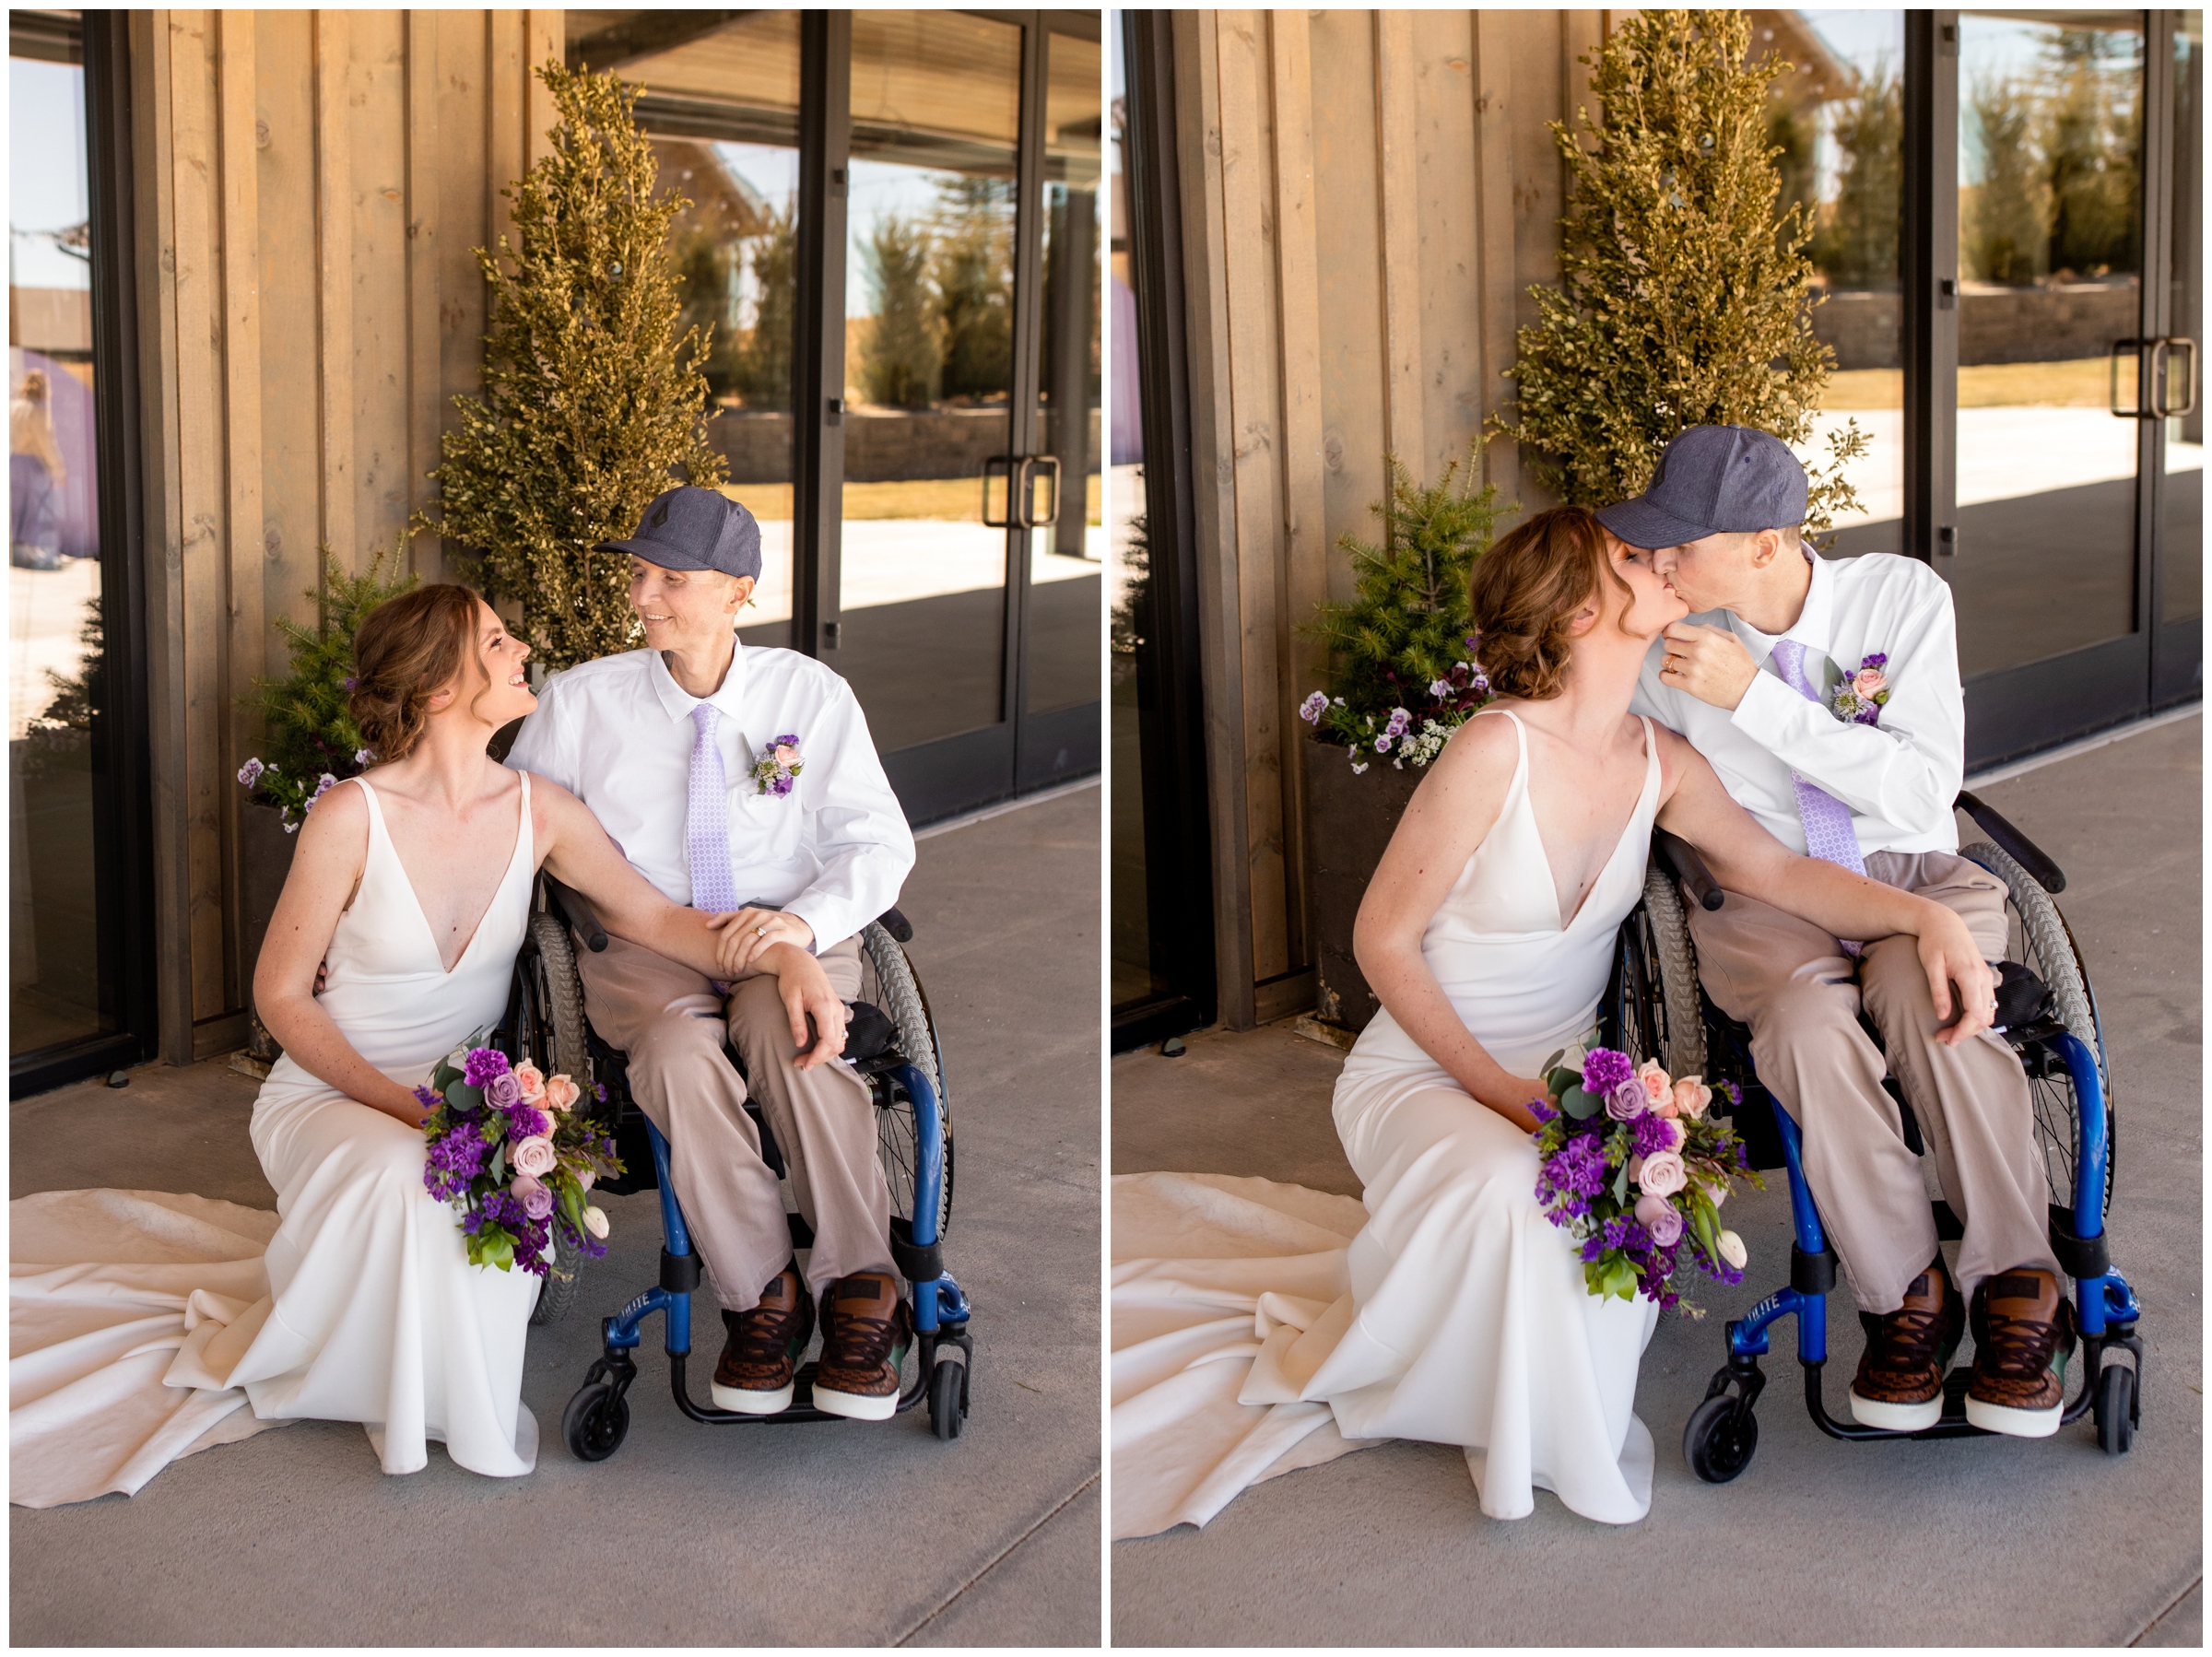 Bonnie Blues Colorado wedding photos during spring by CO elopement photographer Plum Pretty Photography